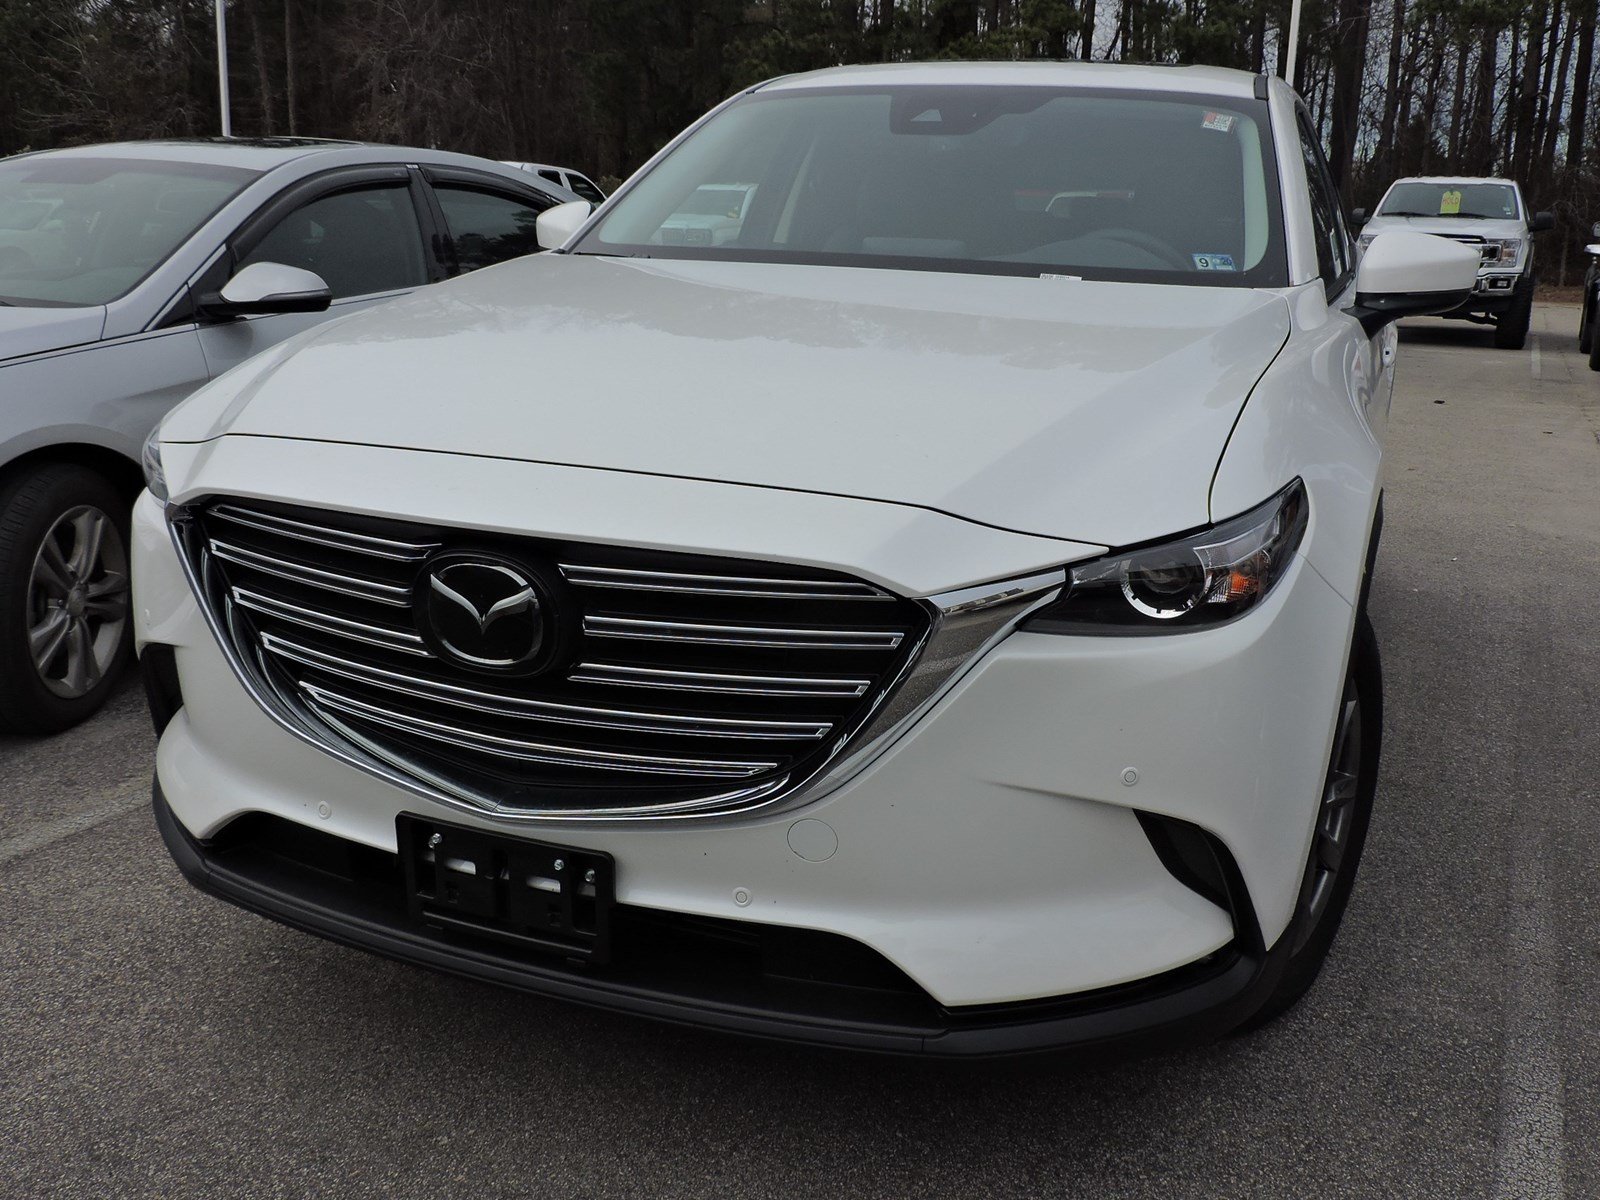 New 2019 Mazda Cx 9 Touring With Navigation